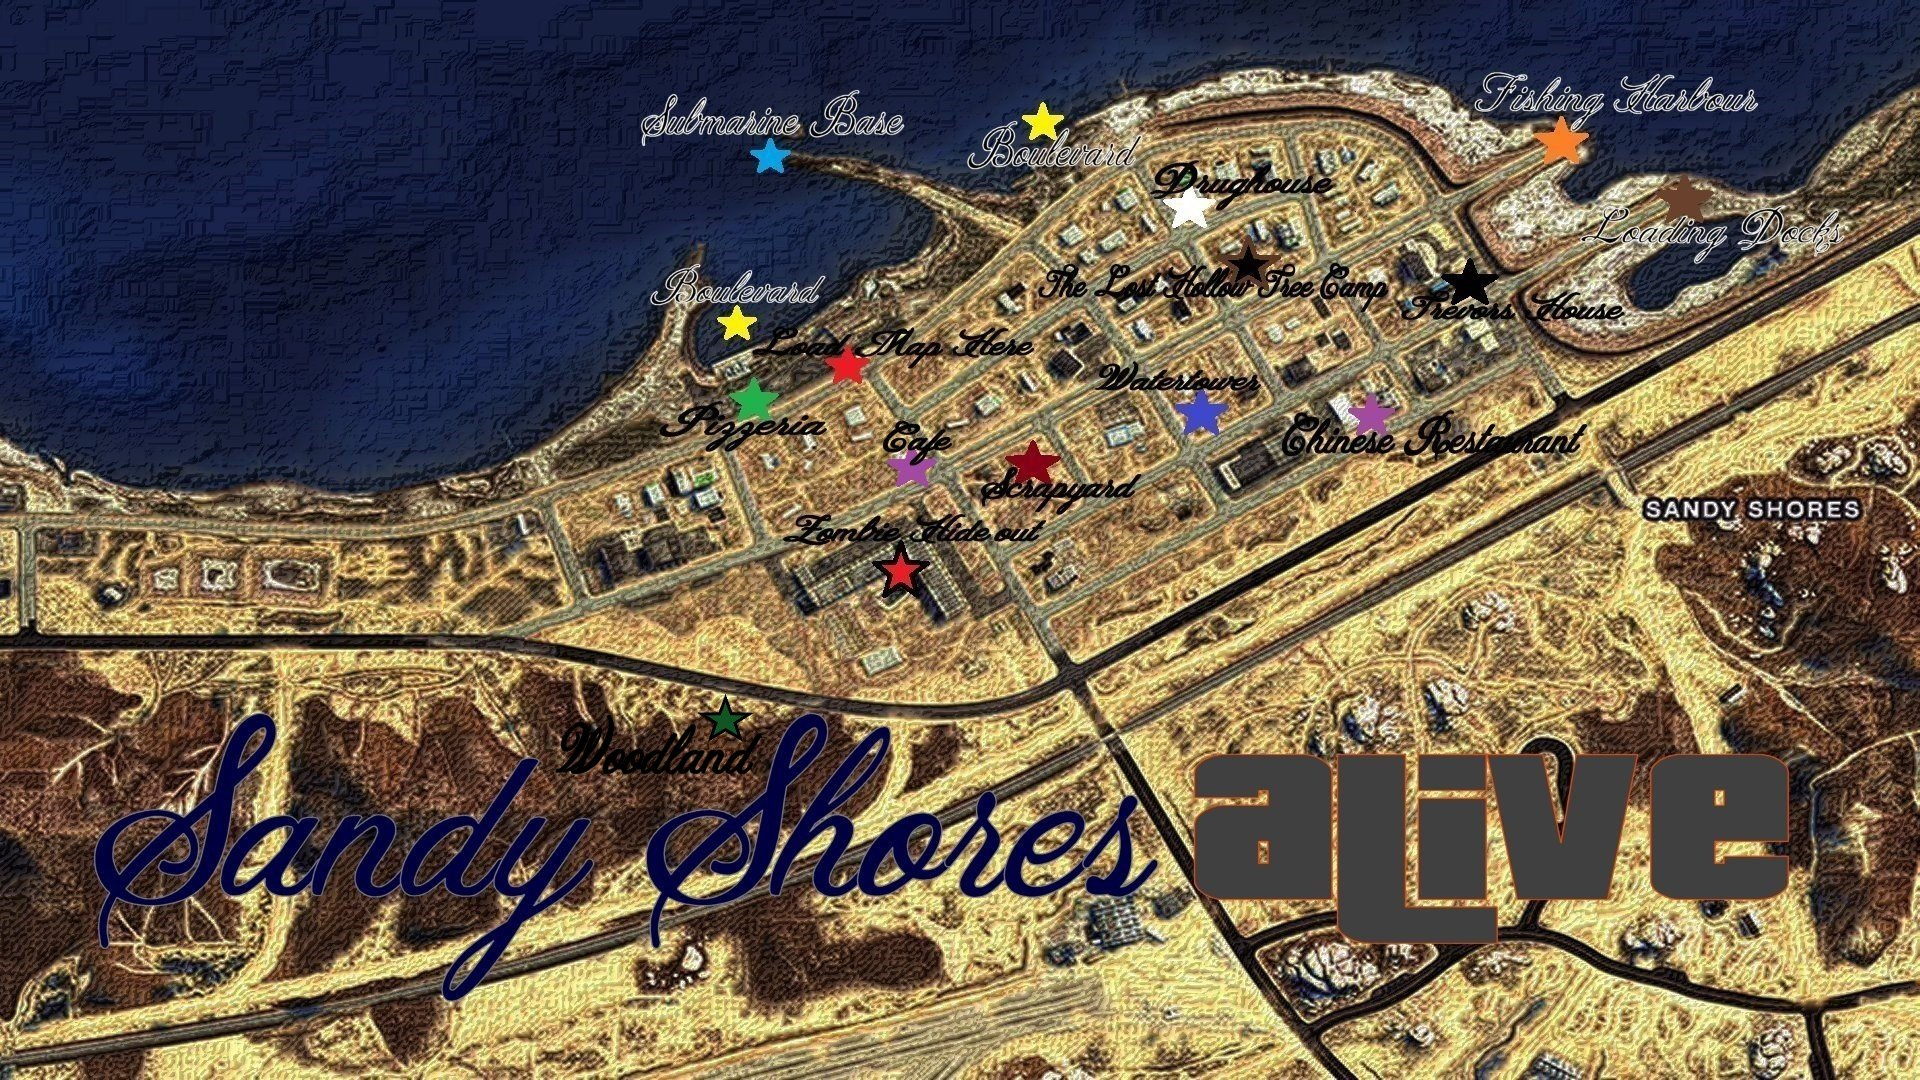 33 Gta V Map With Street Names Maps Database Source